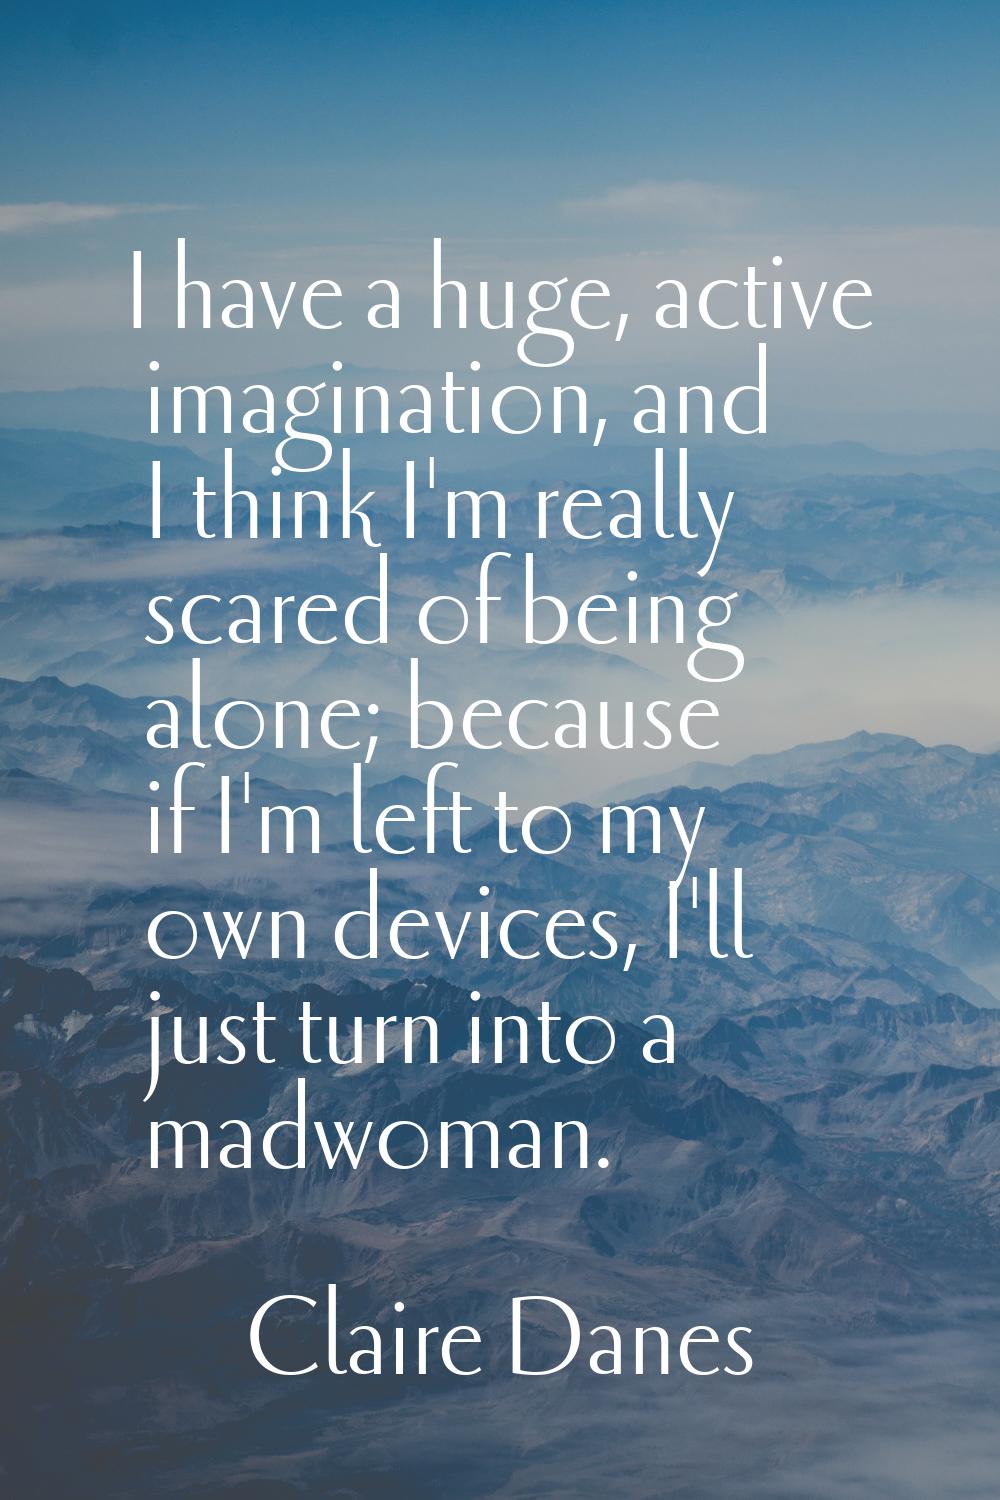 I have a huge, active imagination, and I think I'm really scared of being alone; because if I'm lef